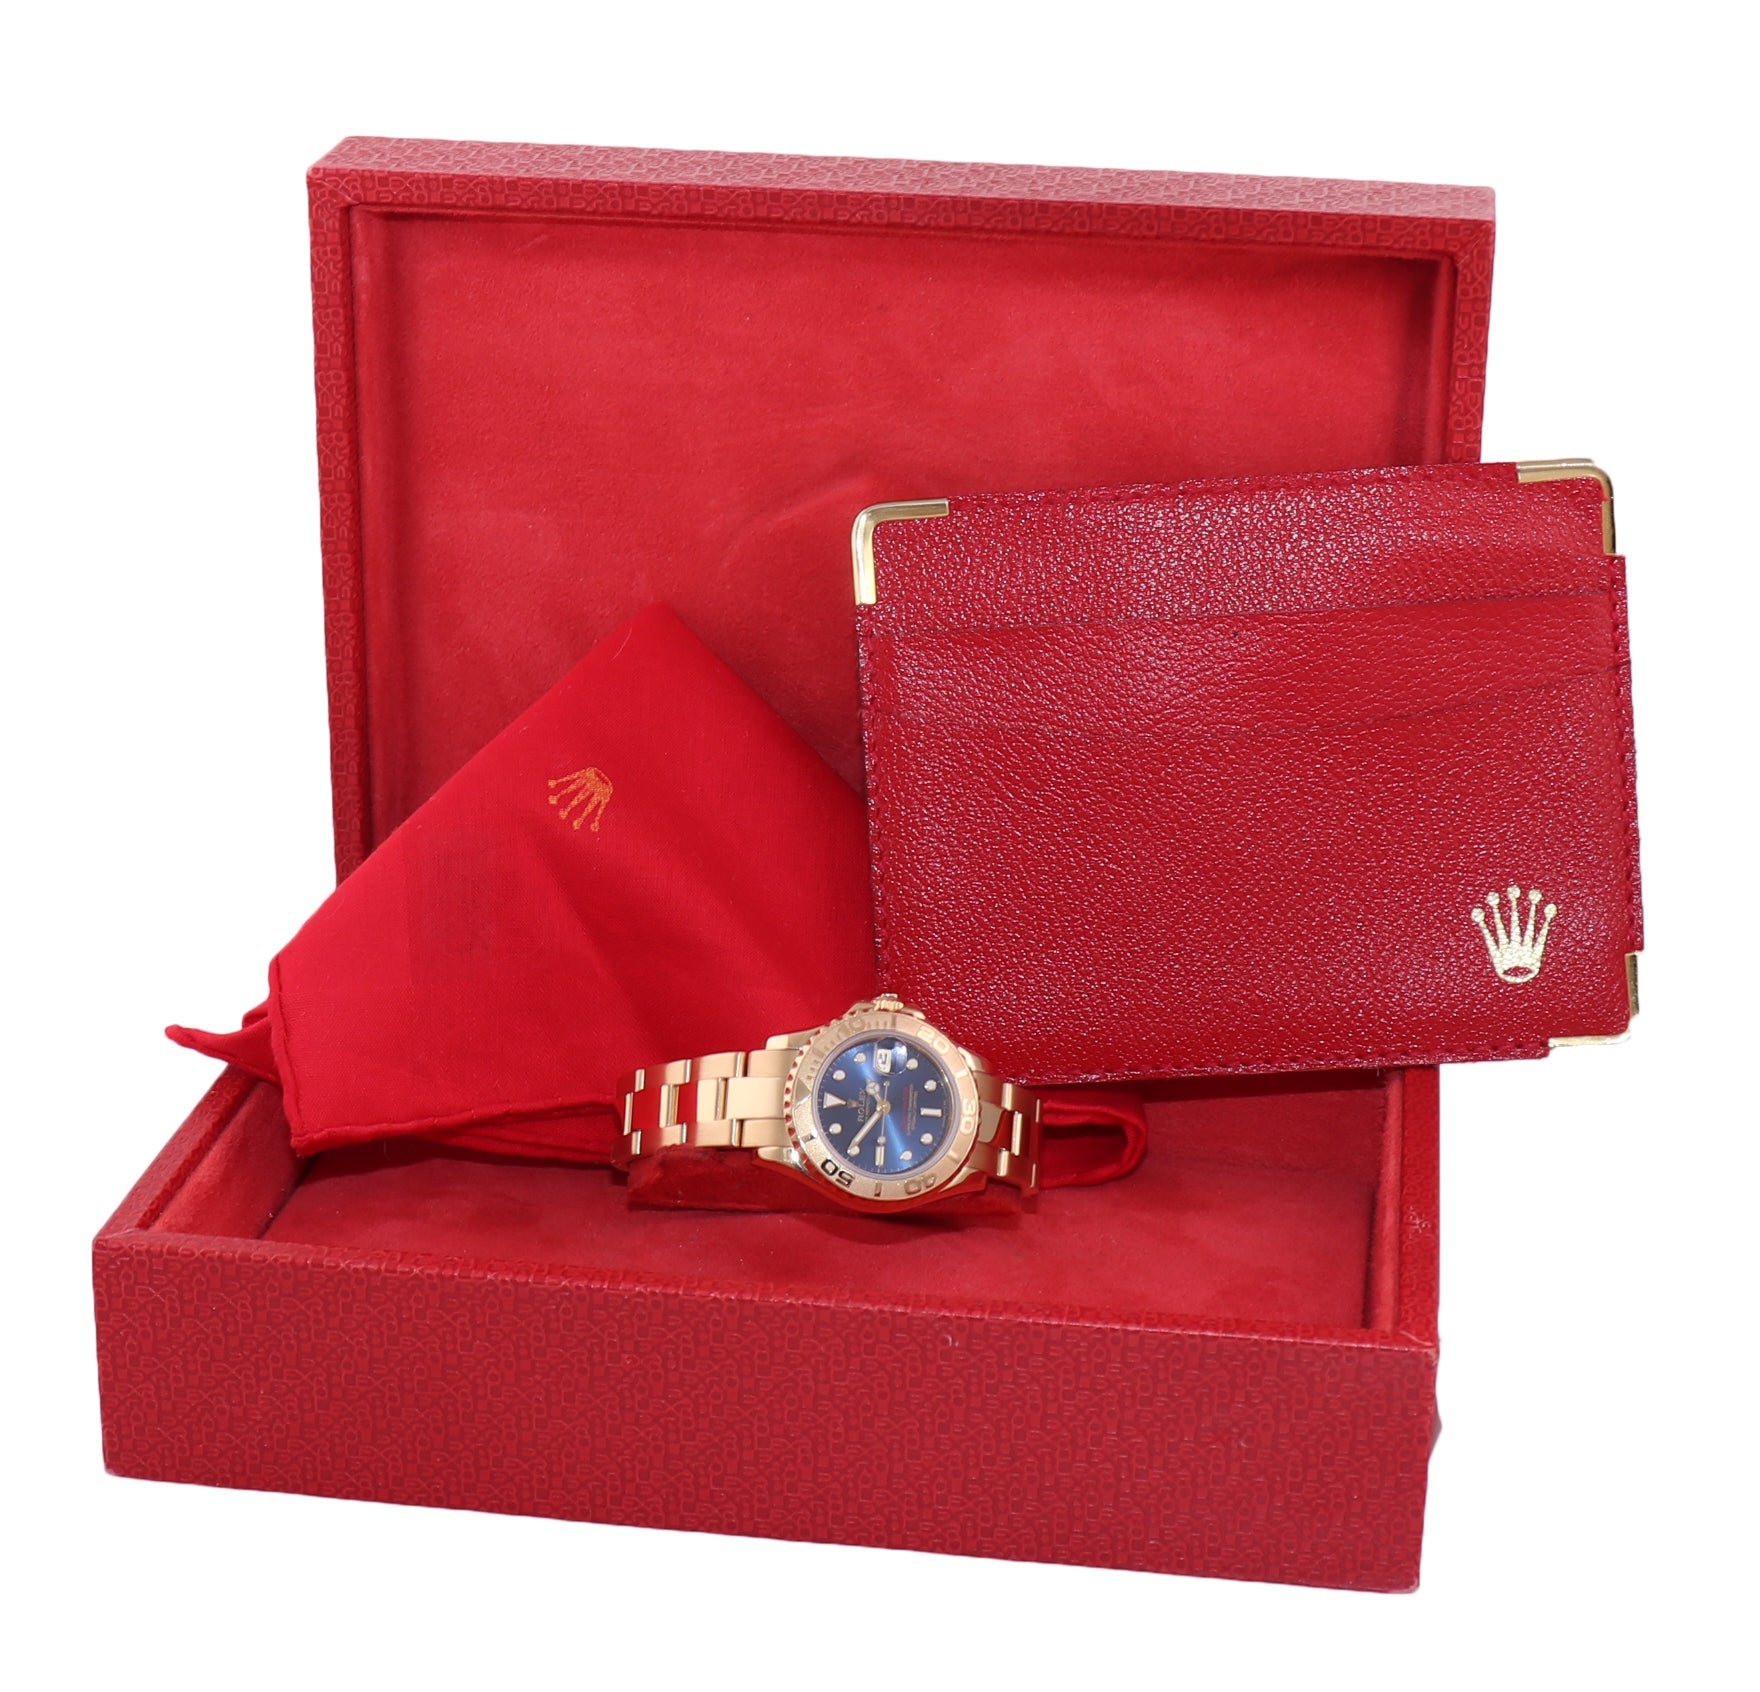 Ladies 29mm 18k Yellow Gold Rolex Yacht-Master Blue Dial Watch 69628